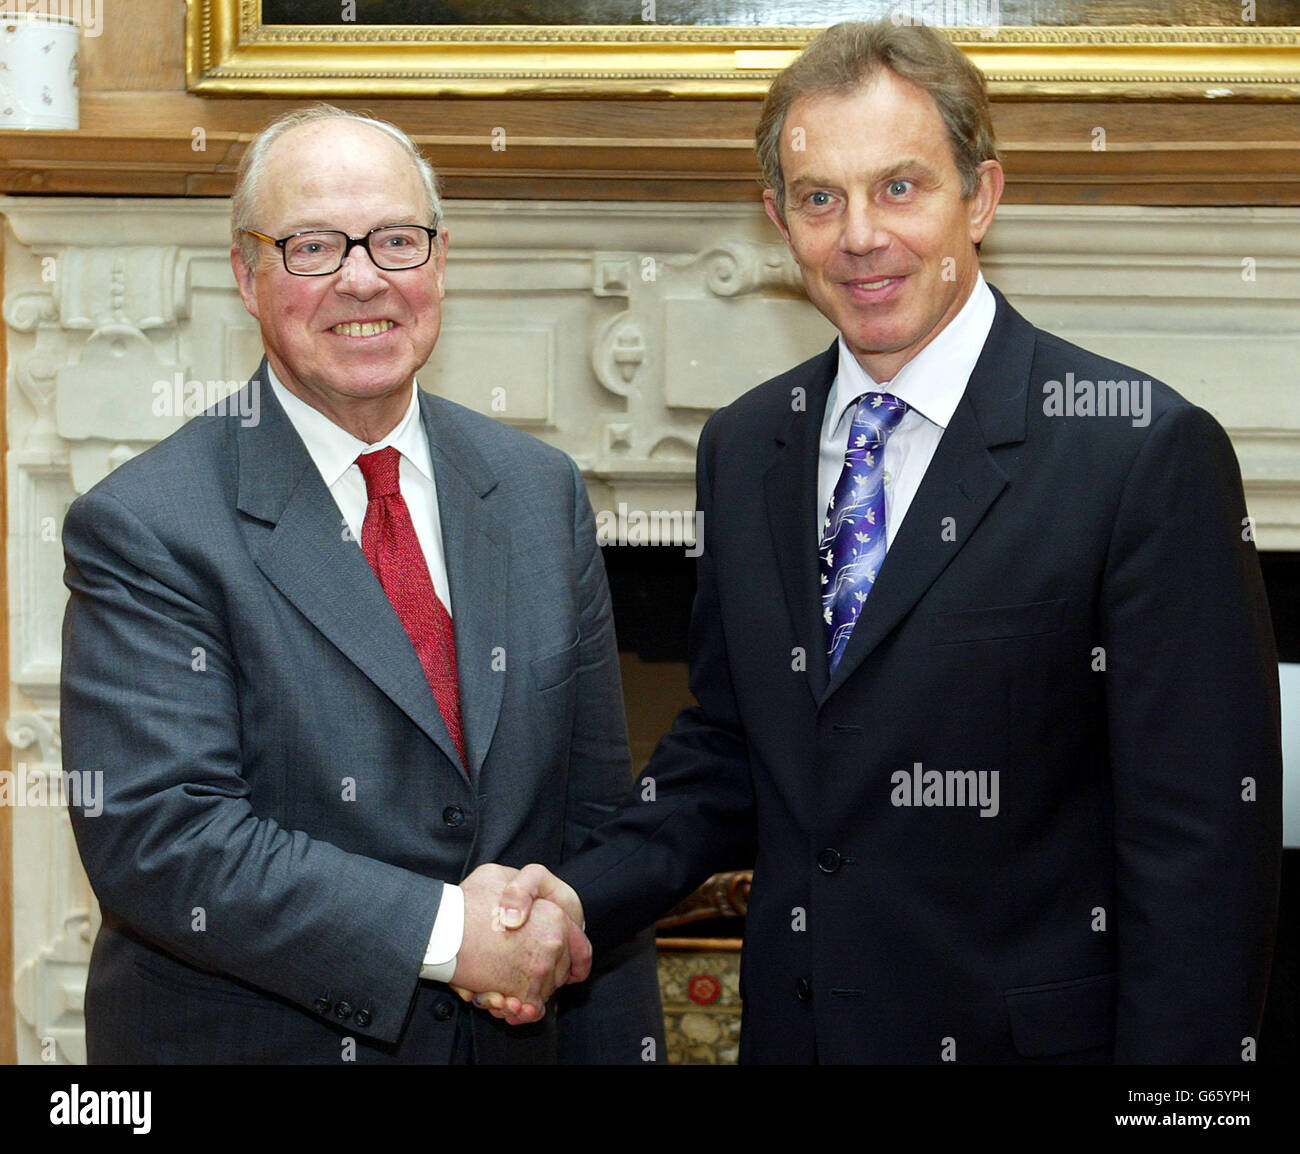 Britain's Prime Minister Tony Blair (R) greets chief U.N. weapons inspector Hans Blix ahead of talks on Iraq at Chequers in Buckinghamshire. Stock Photo